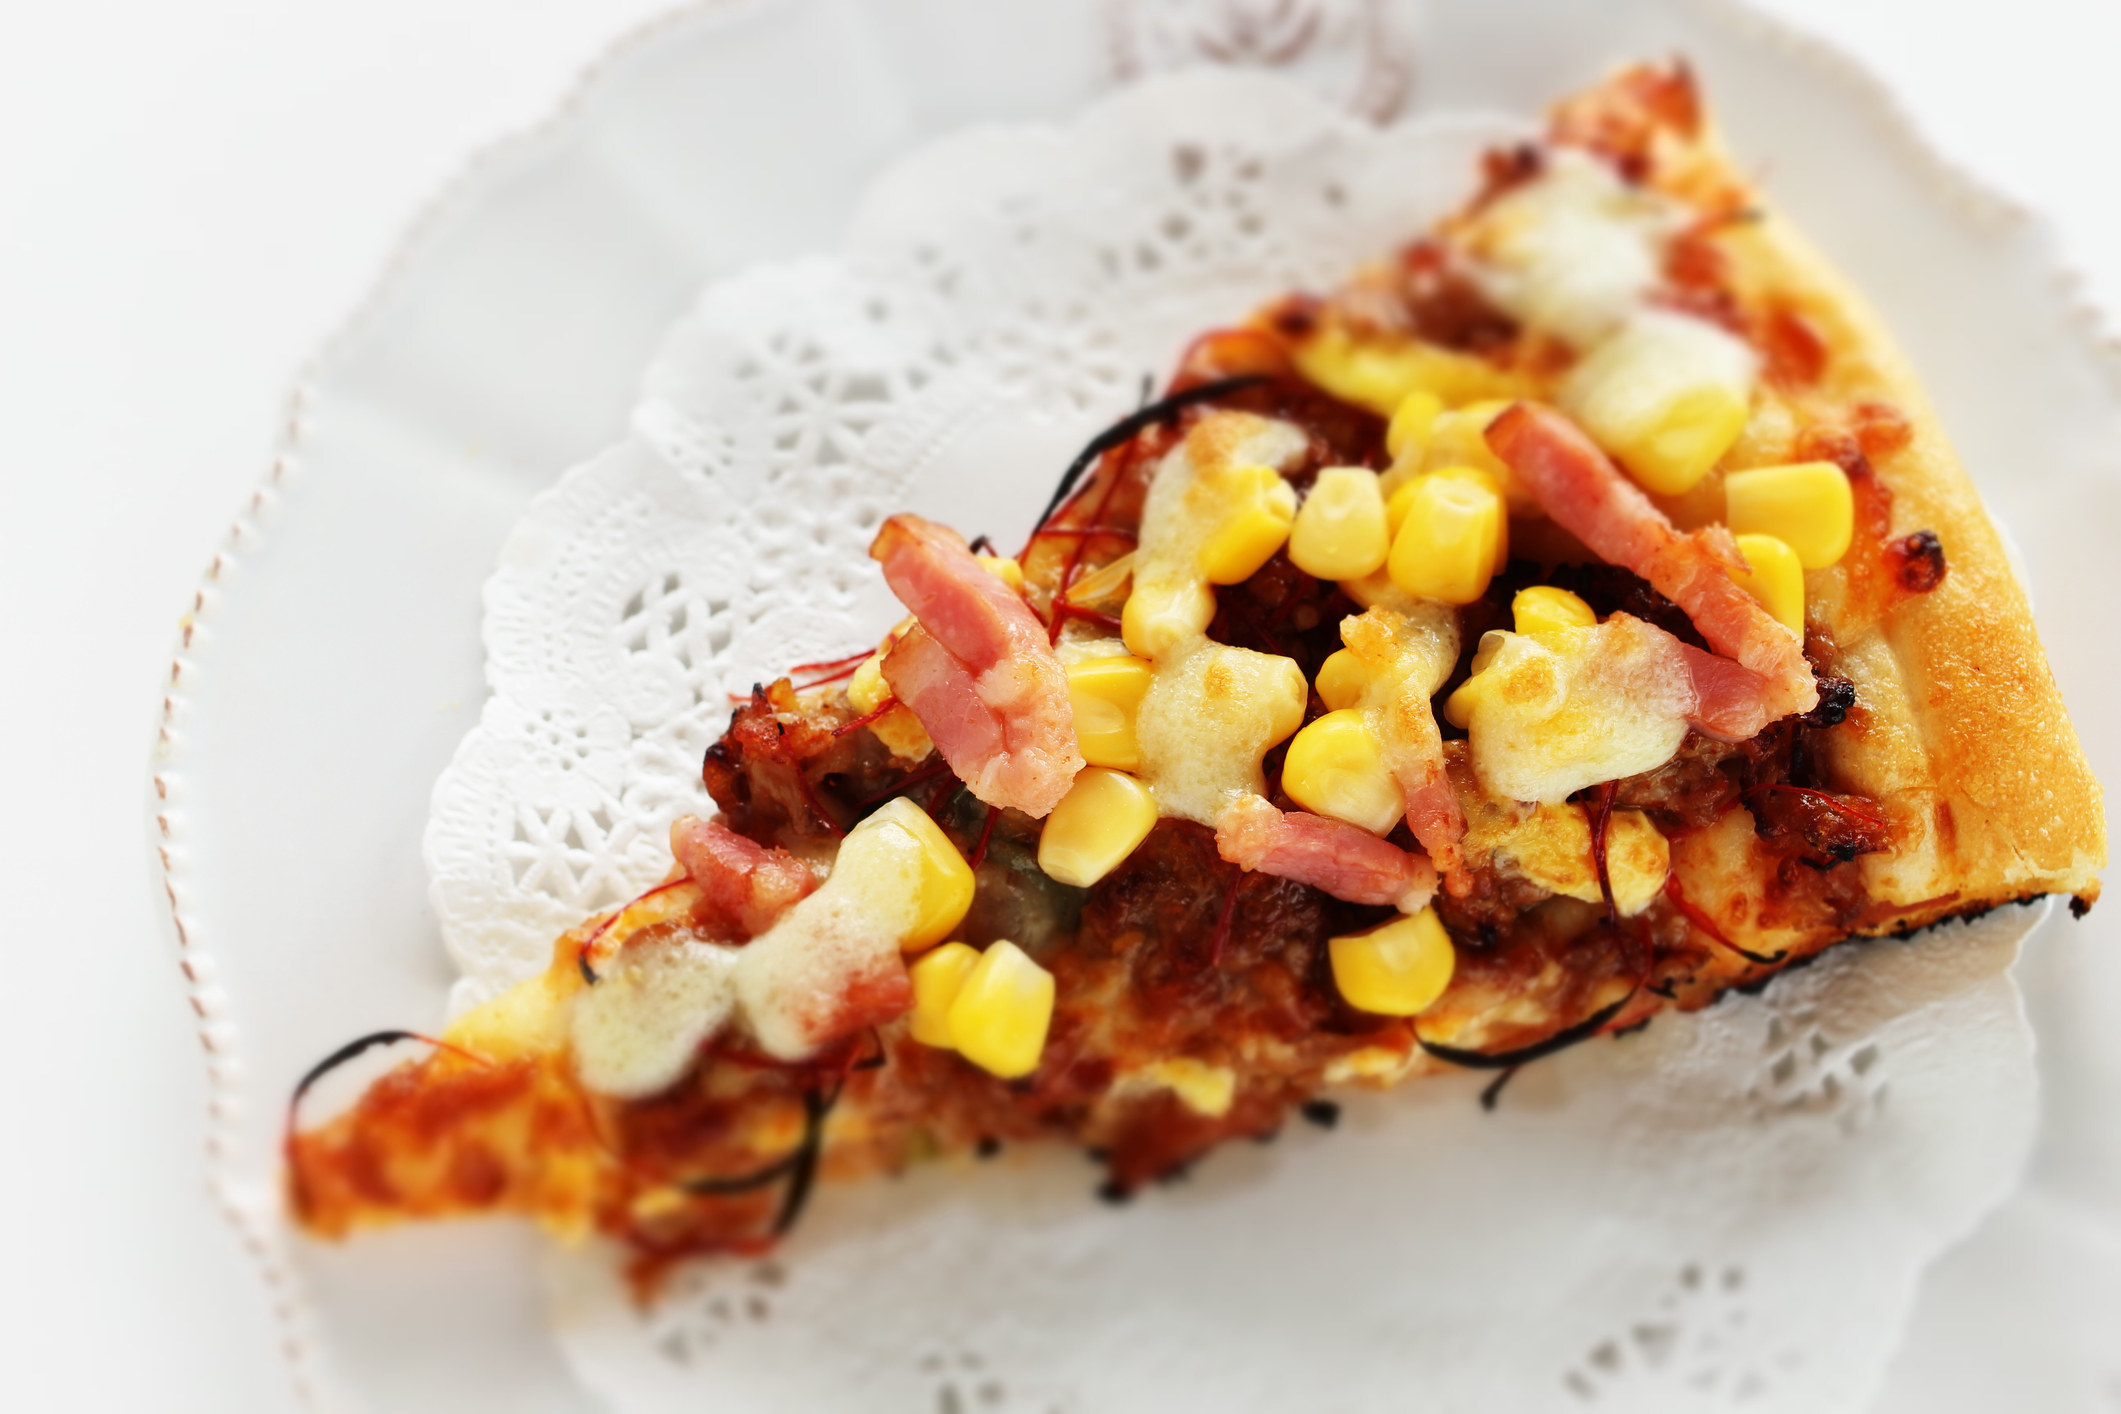 A slice of pizza topped with bacon and corn.